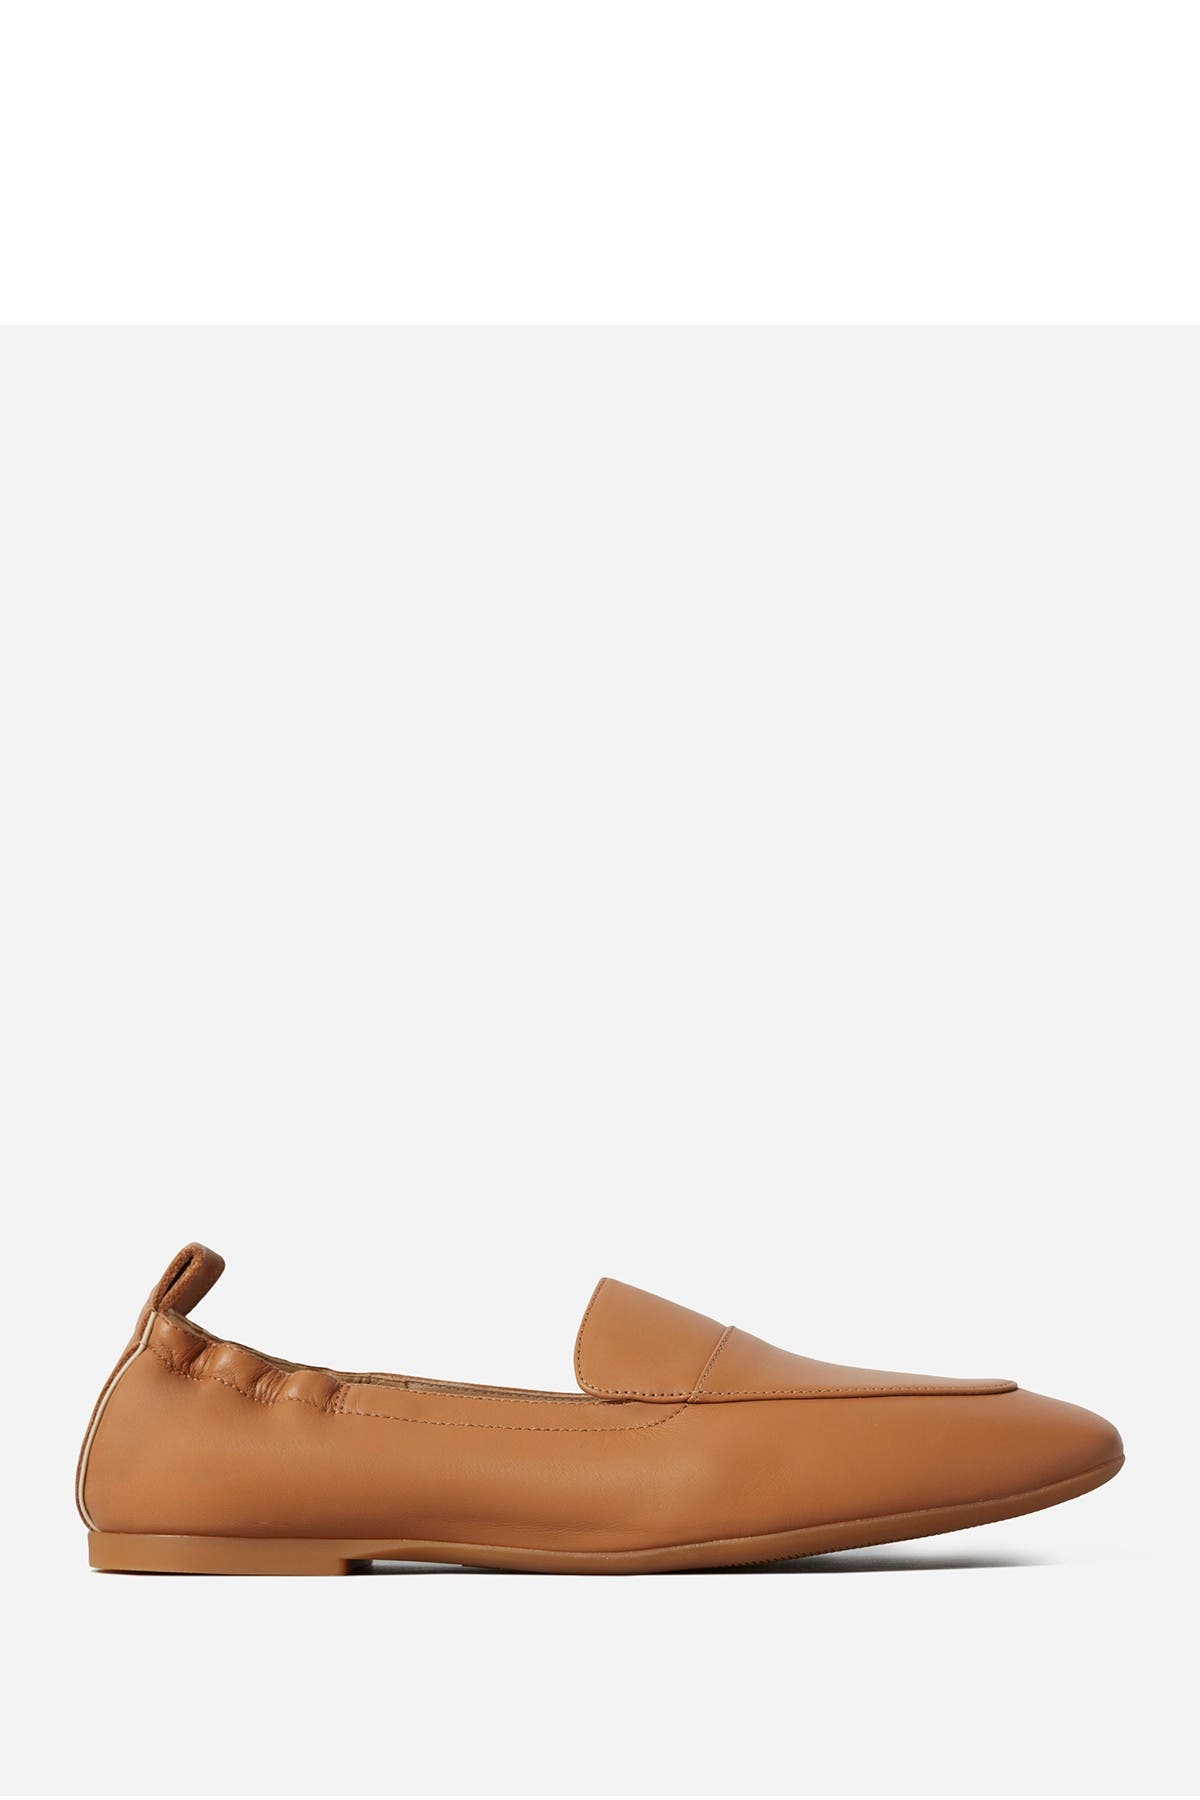 nordstrom womens loafers